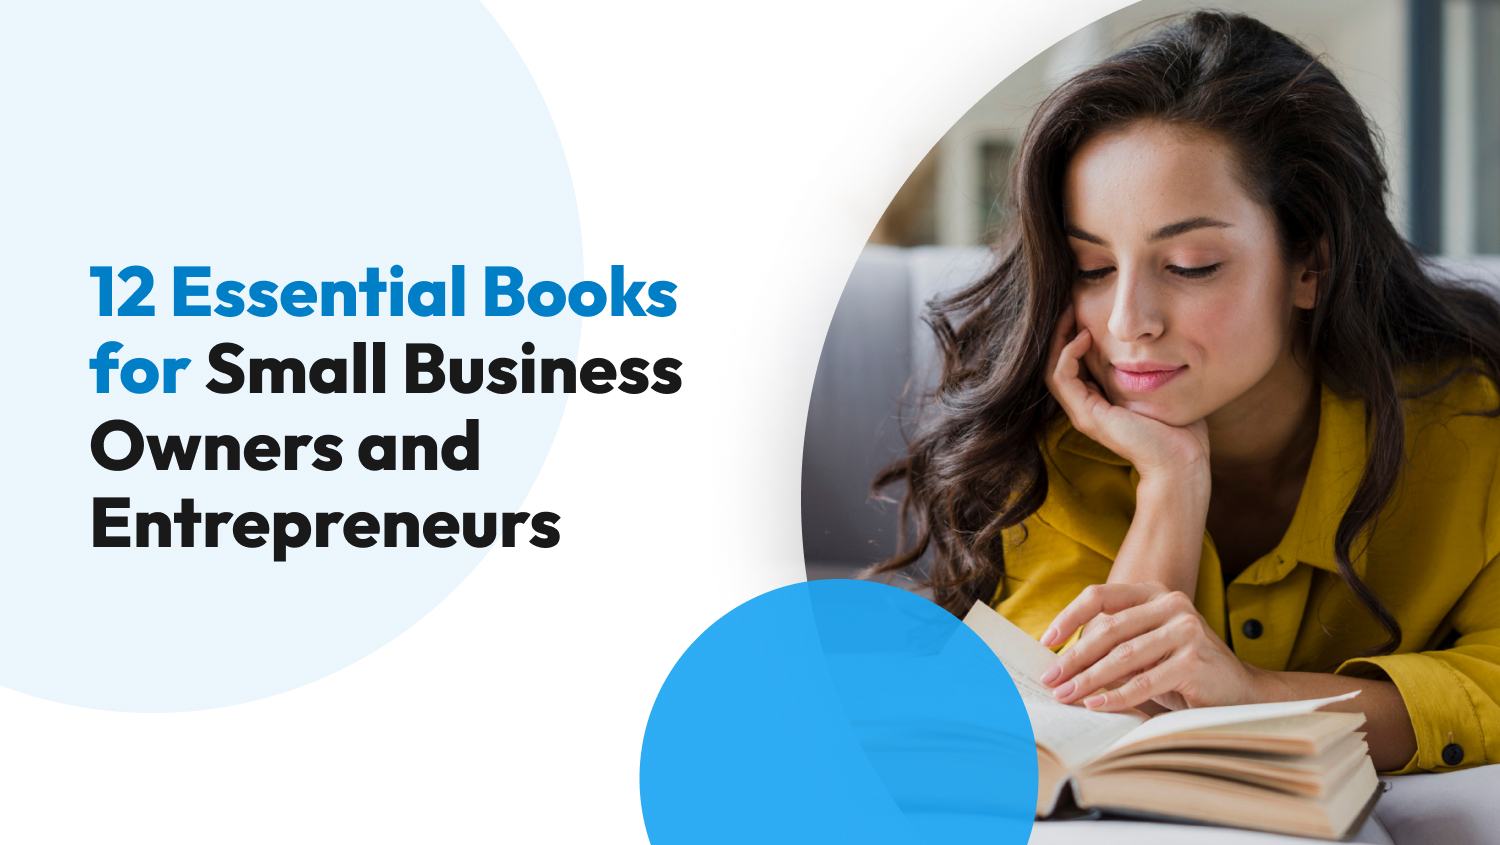 12 Essential Books for Small Business Owners and Entrepreneurs